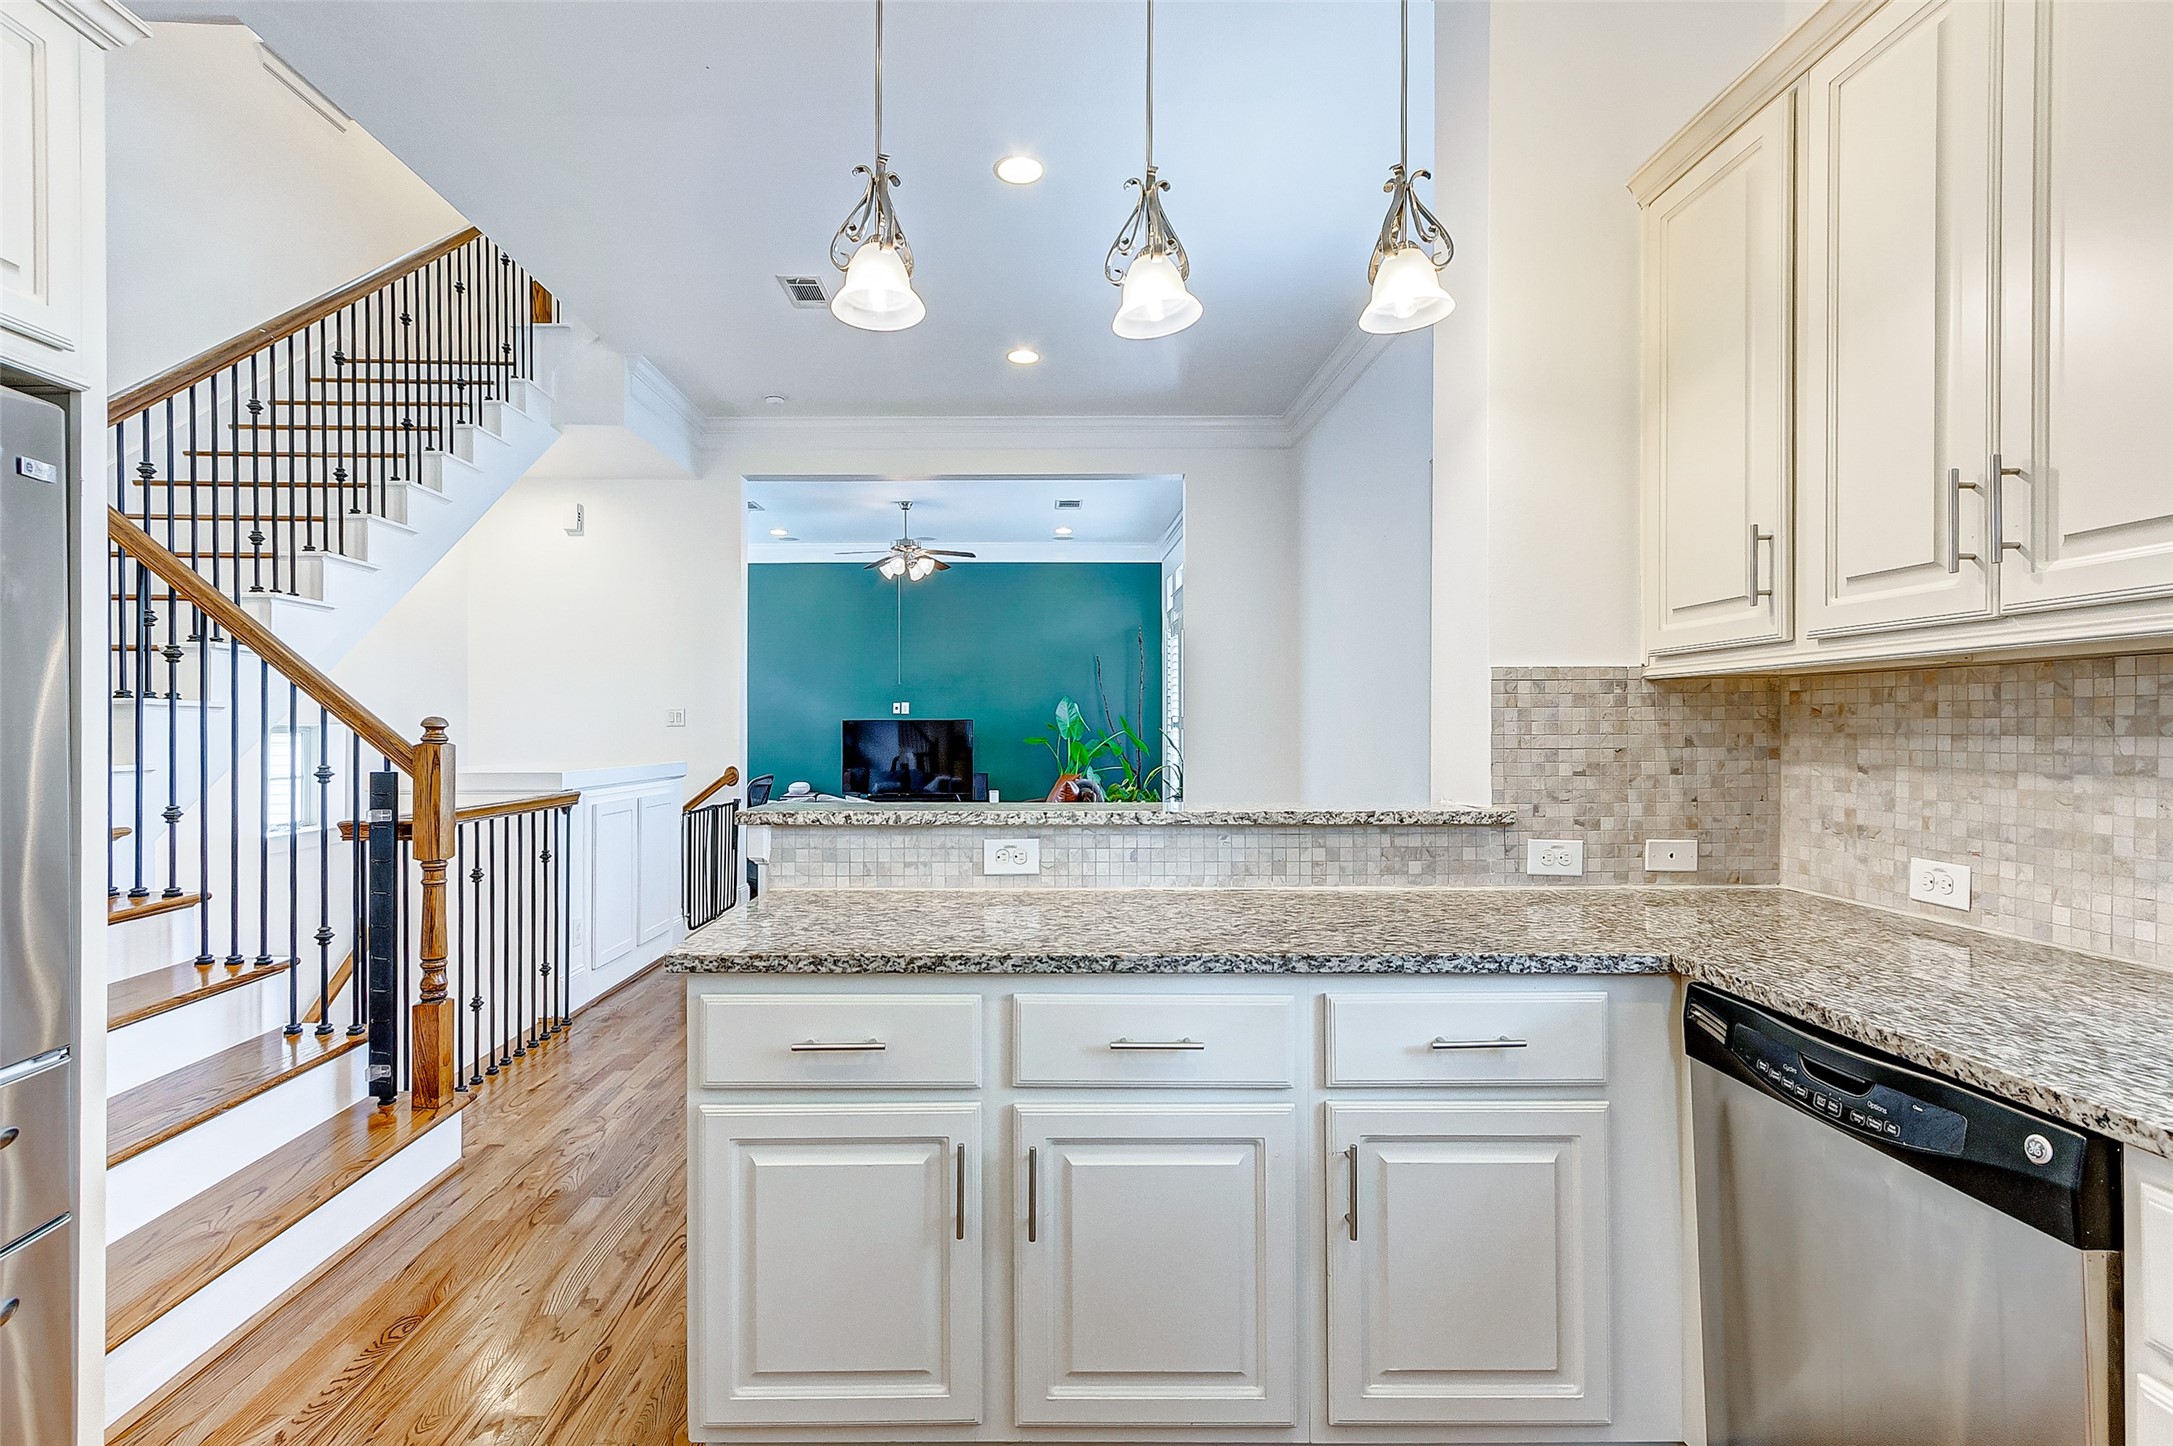 Your new kitchen boasts a granite breakfast bar open to the elegant formal dining room with views of your family room.